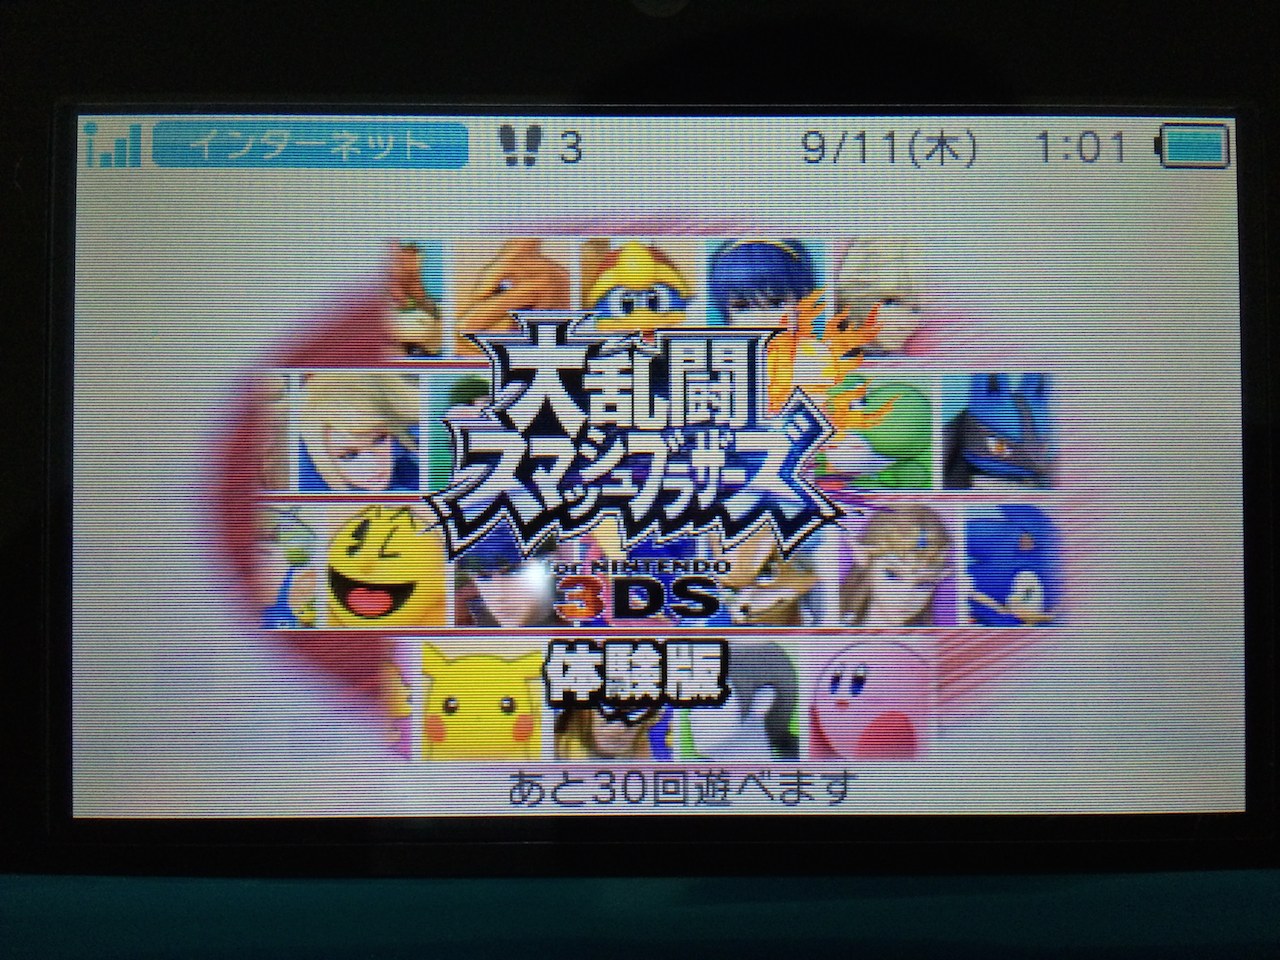 Smash bros for 3ds trial version 04